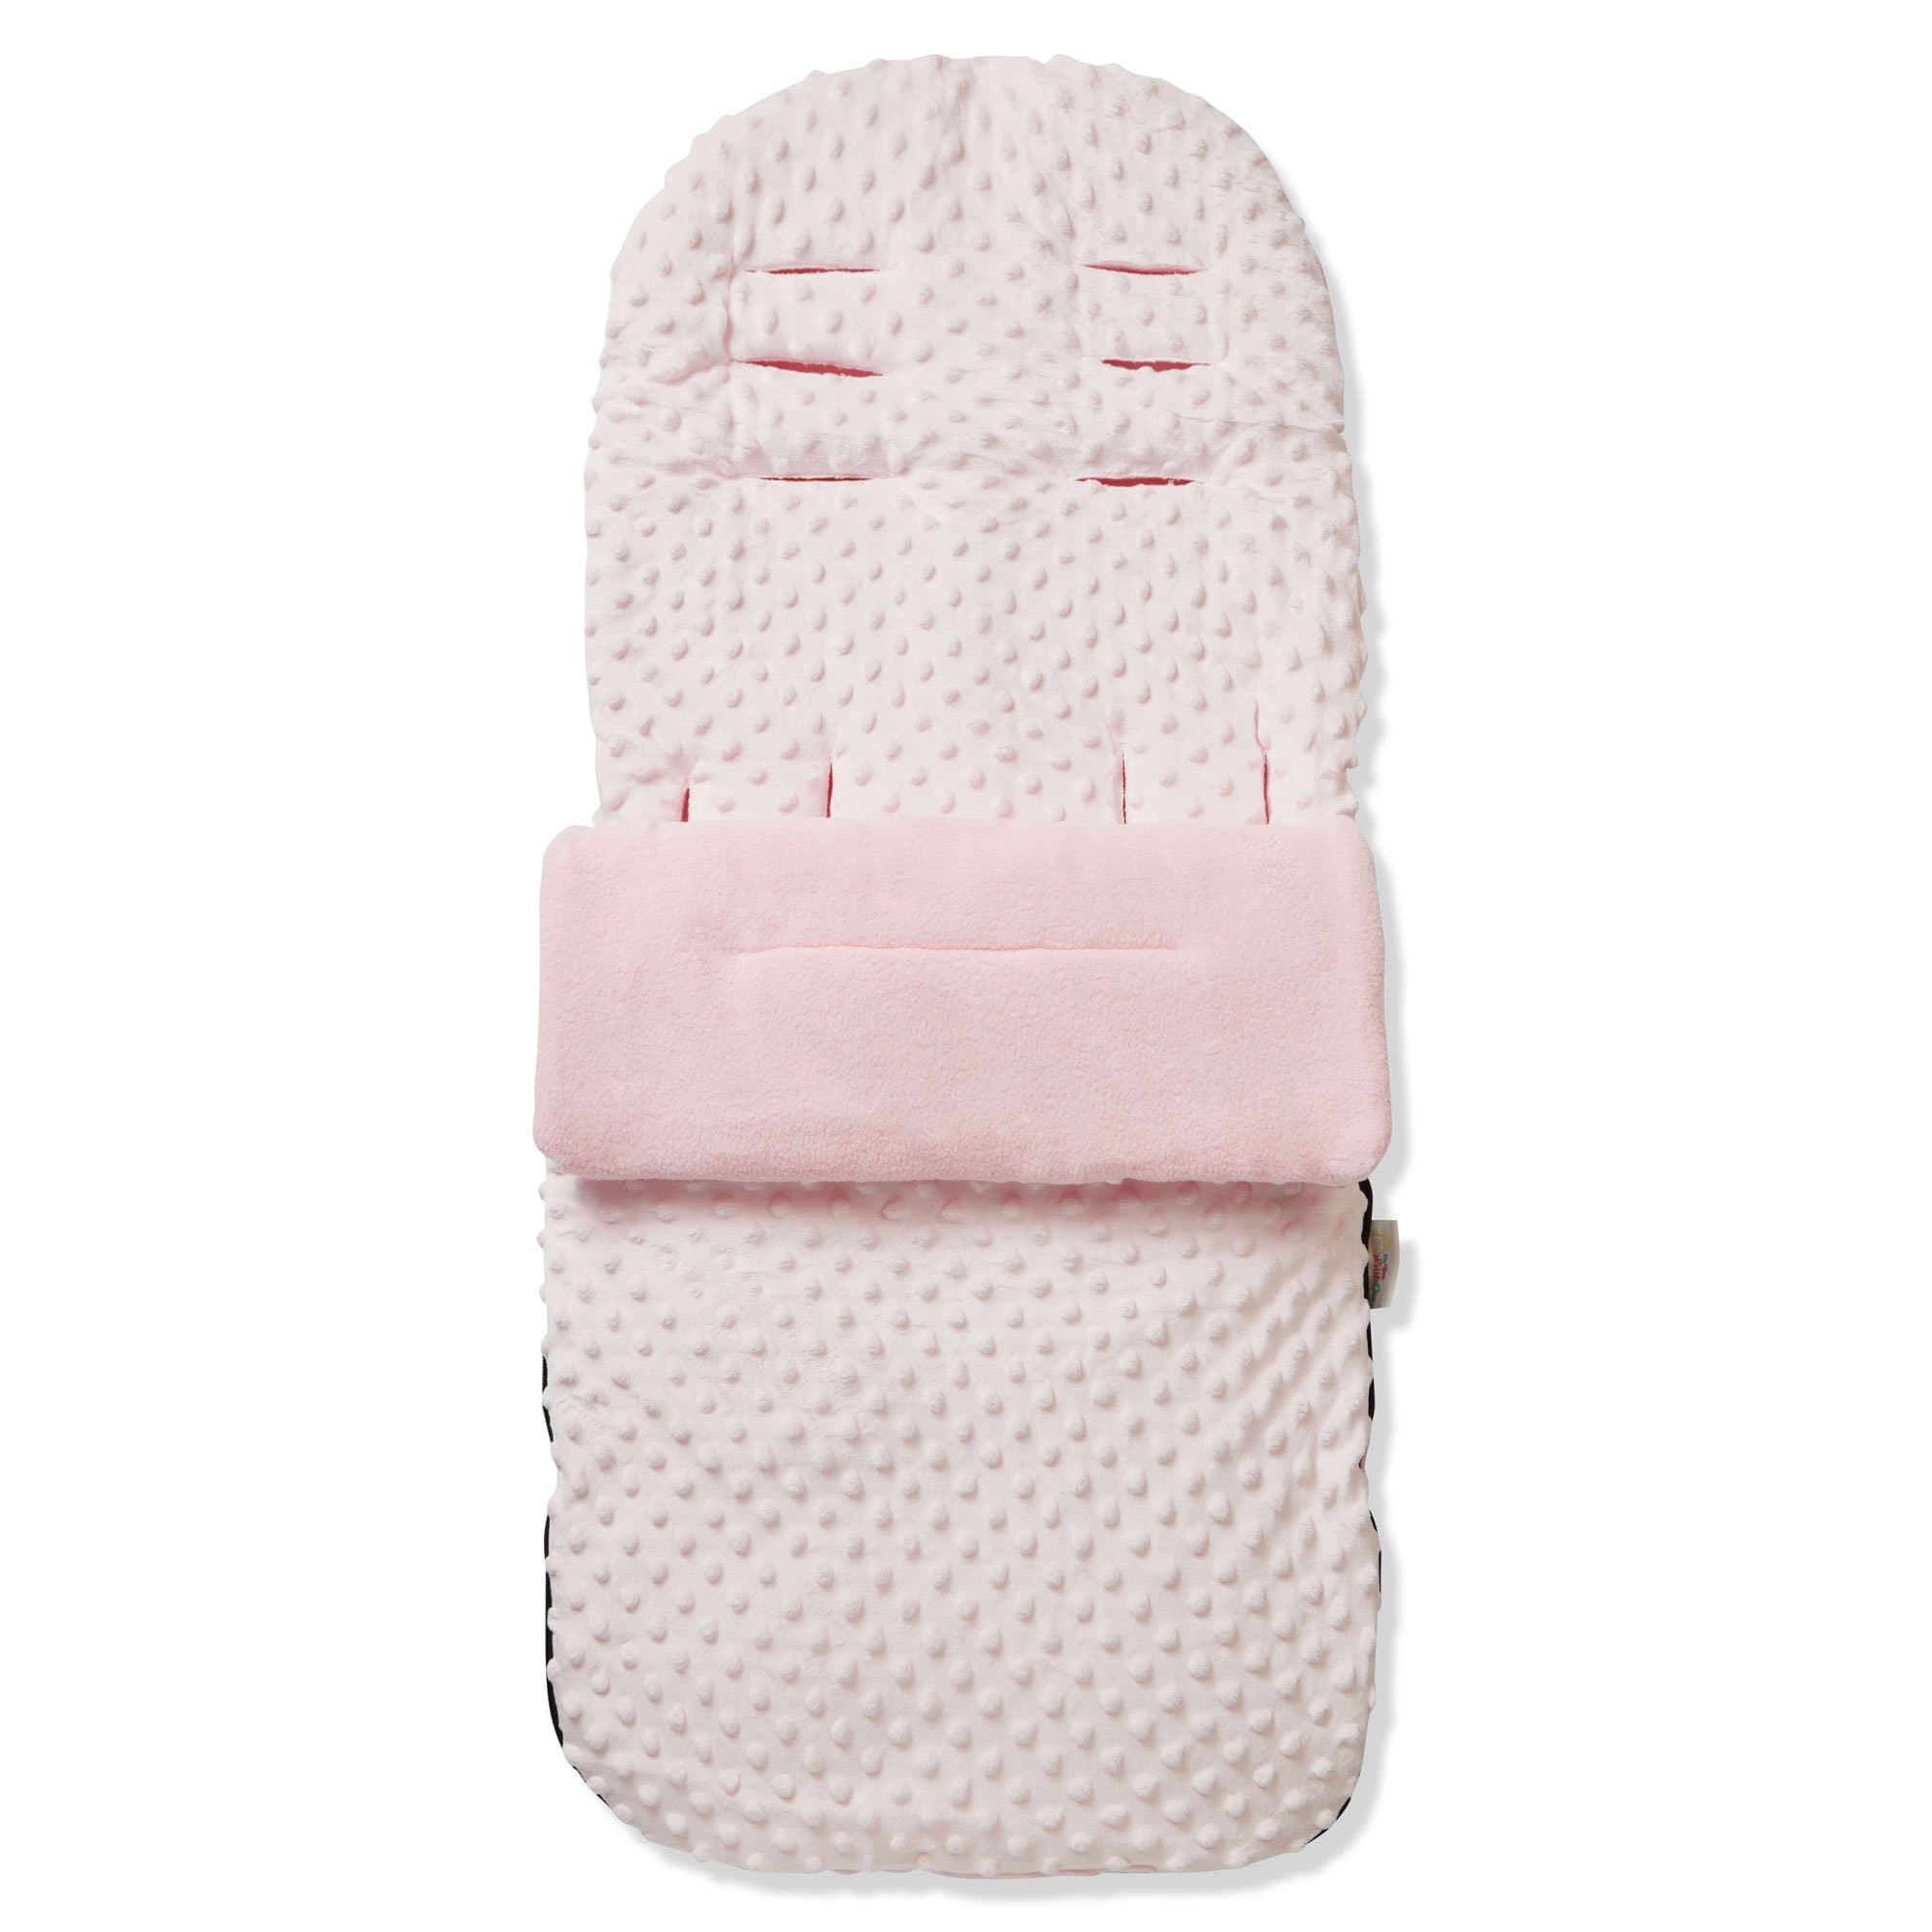 Dimple Footmuff / Cosy Toes Compatible with Esprit - Pink / Fits All Models | For Your Little One